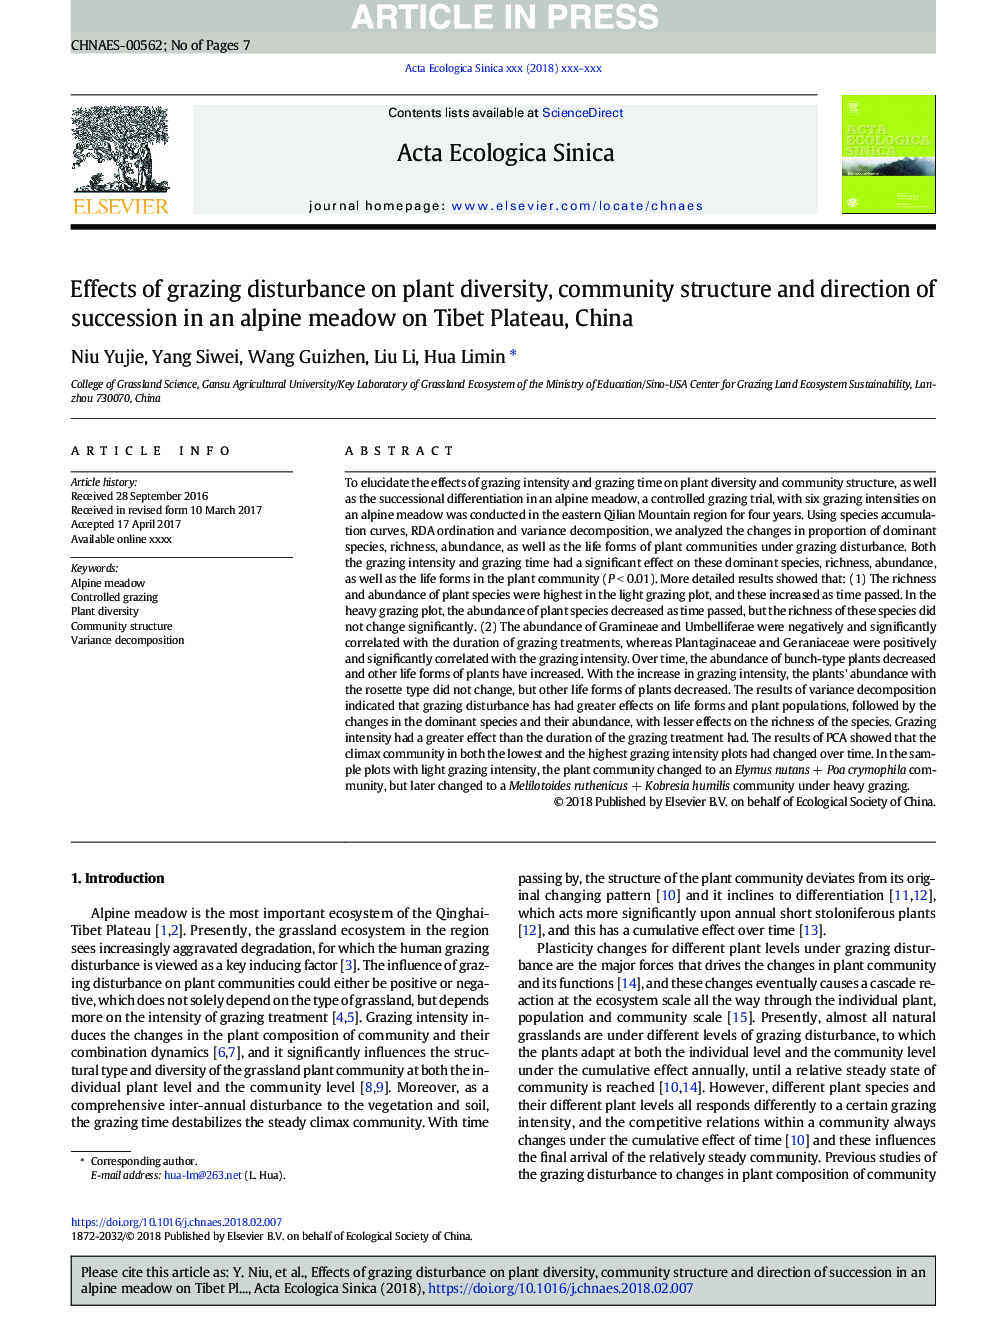 Effects of grazing disturbance on plant diversity, community structure and direction of succession in an alpine meadow on Tibet Plateau, China